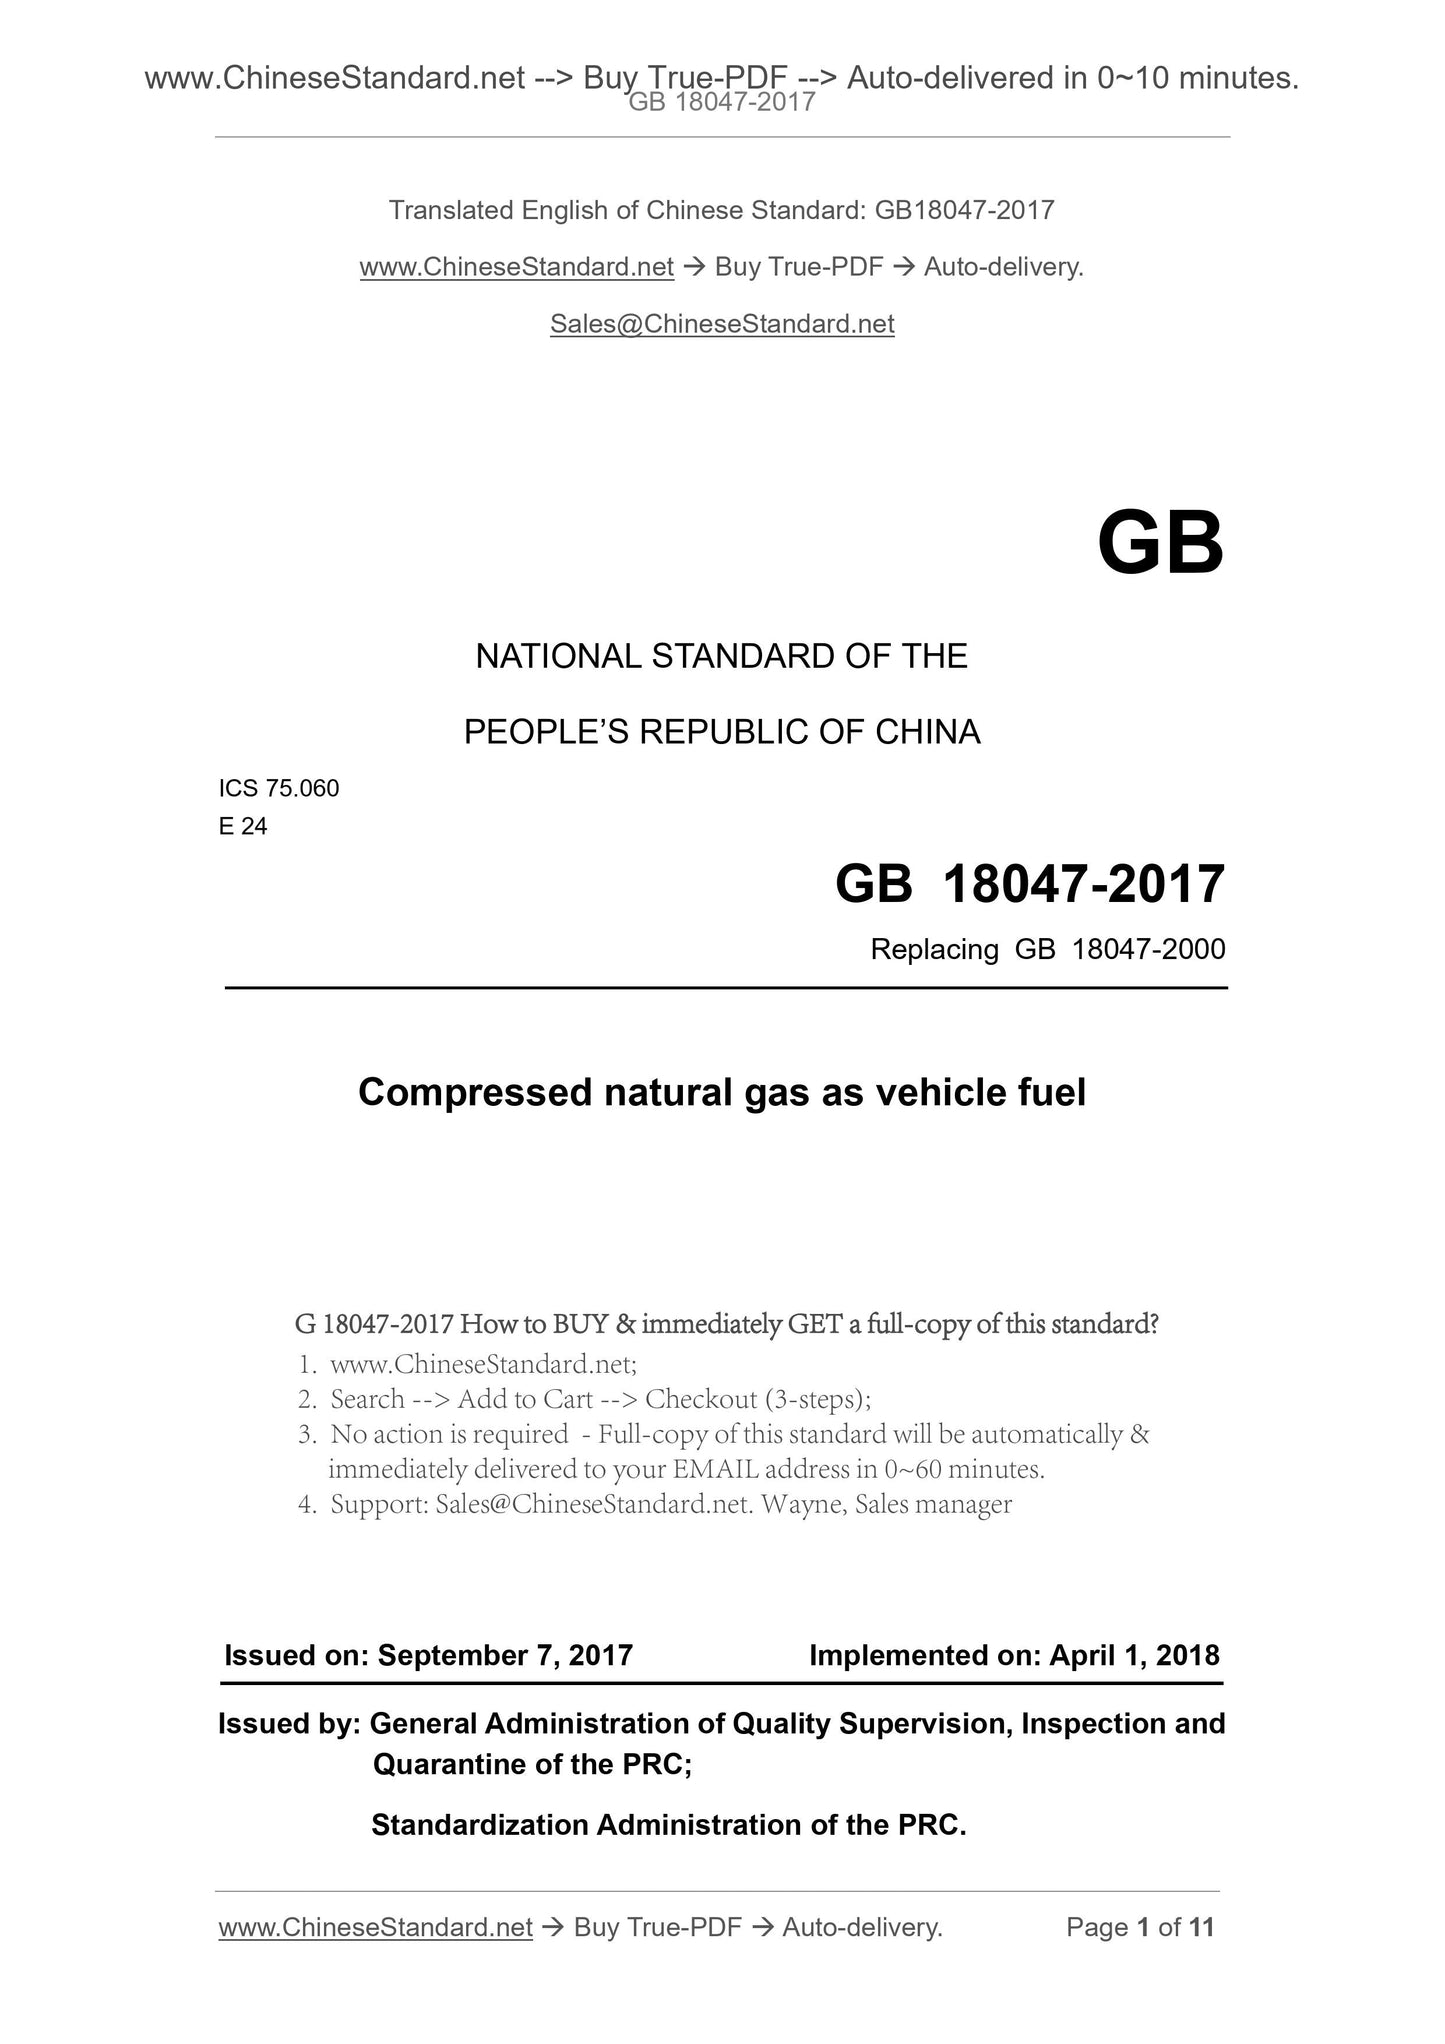 GB 18047-2017 Page 1